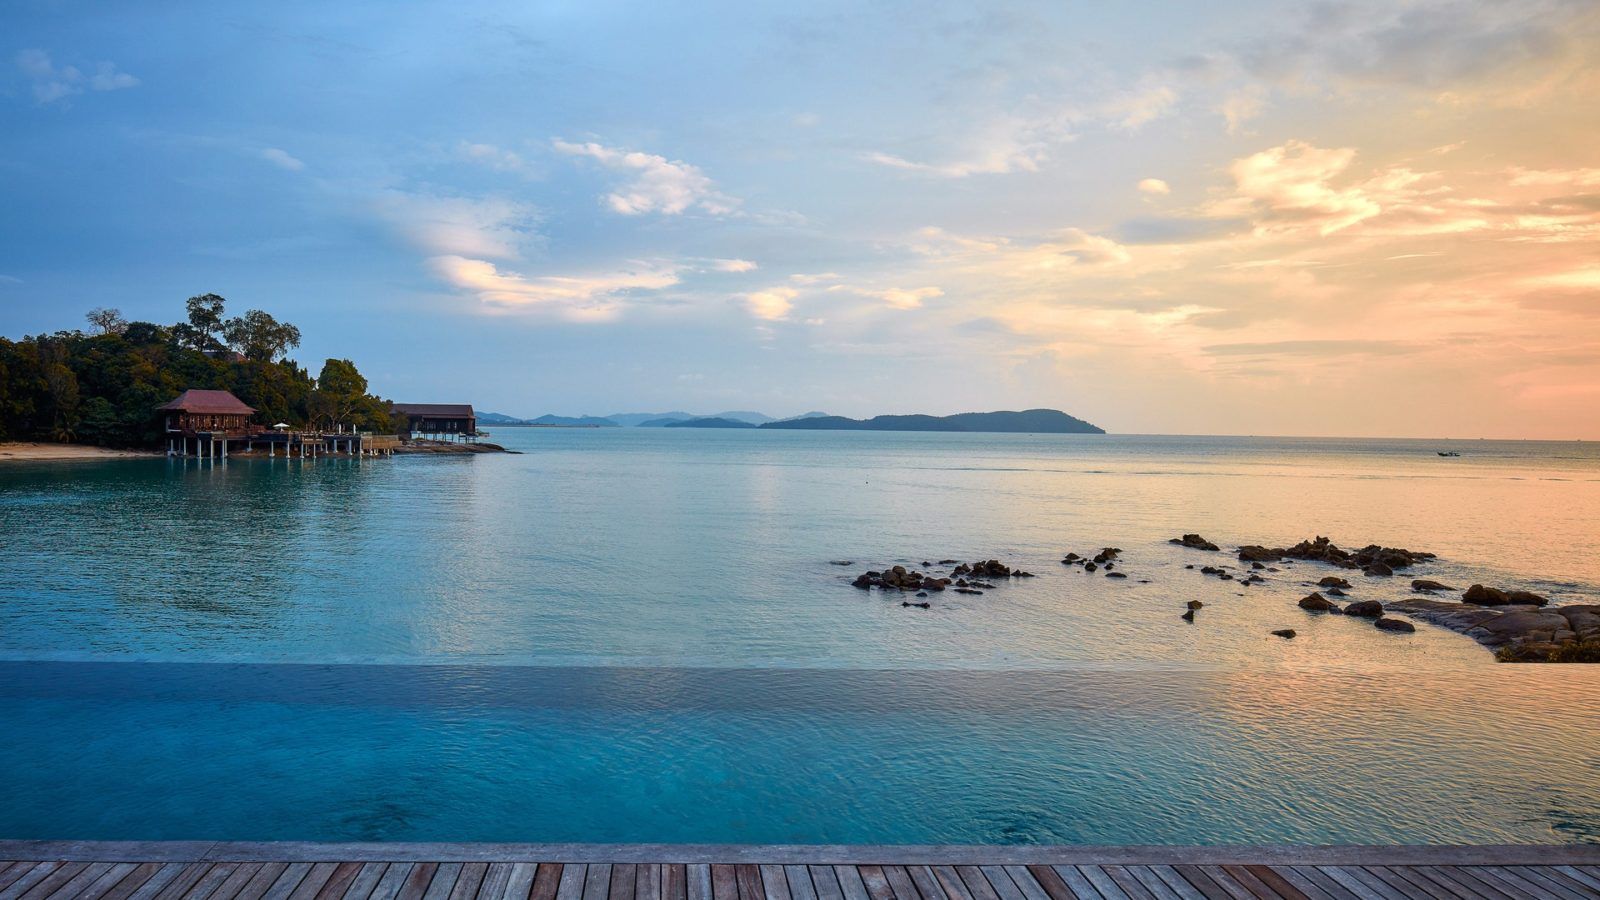 A list of luxury resorts in Langkawi with private pool villas